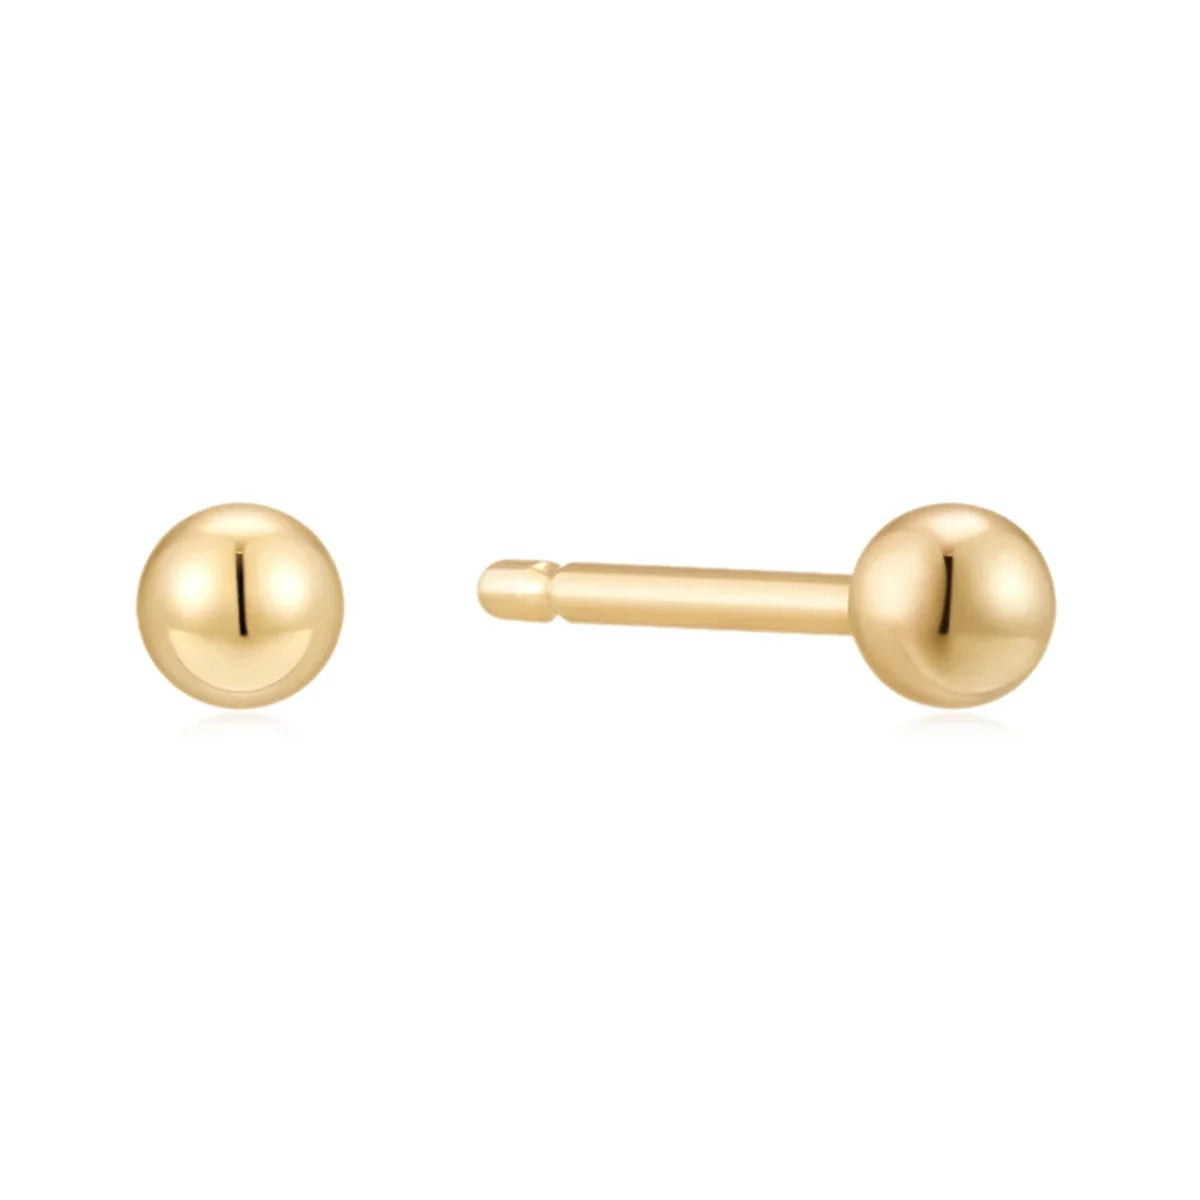 14K gold ball stud earrings tiny and small solid gold helix tragus conch cartilage earrings Ashley Piercing Jewelry